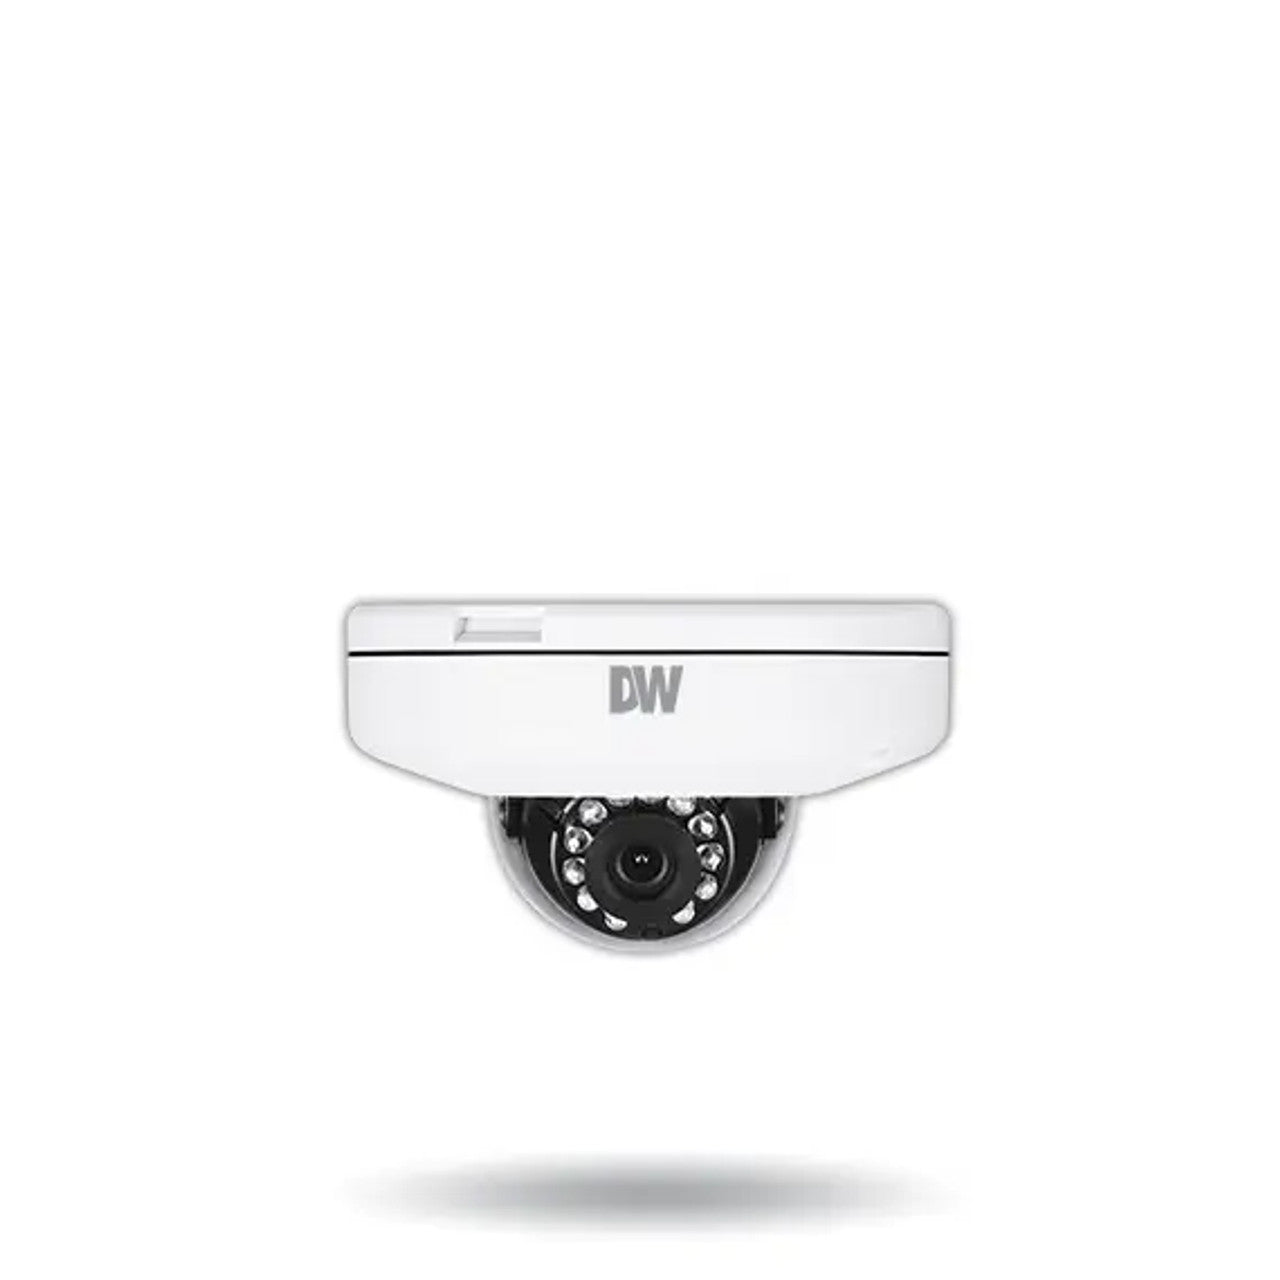 Digital Watchdog DWC-MF4Wi4WC1T 4MP Night Vision Outdoor Dome IP Security Camera, CaaS, 1TB Storage, 4.0mm Fixed Lens